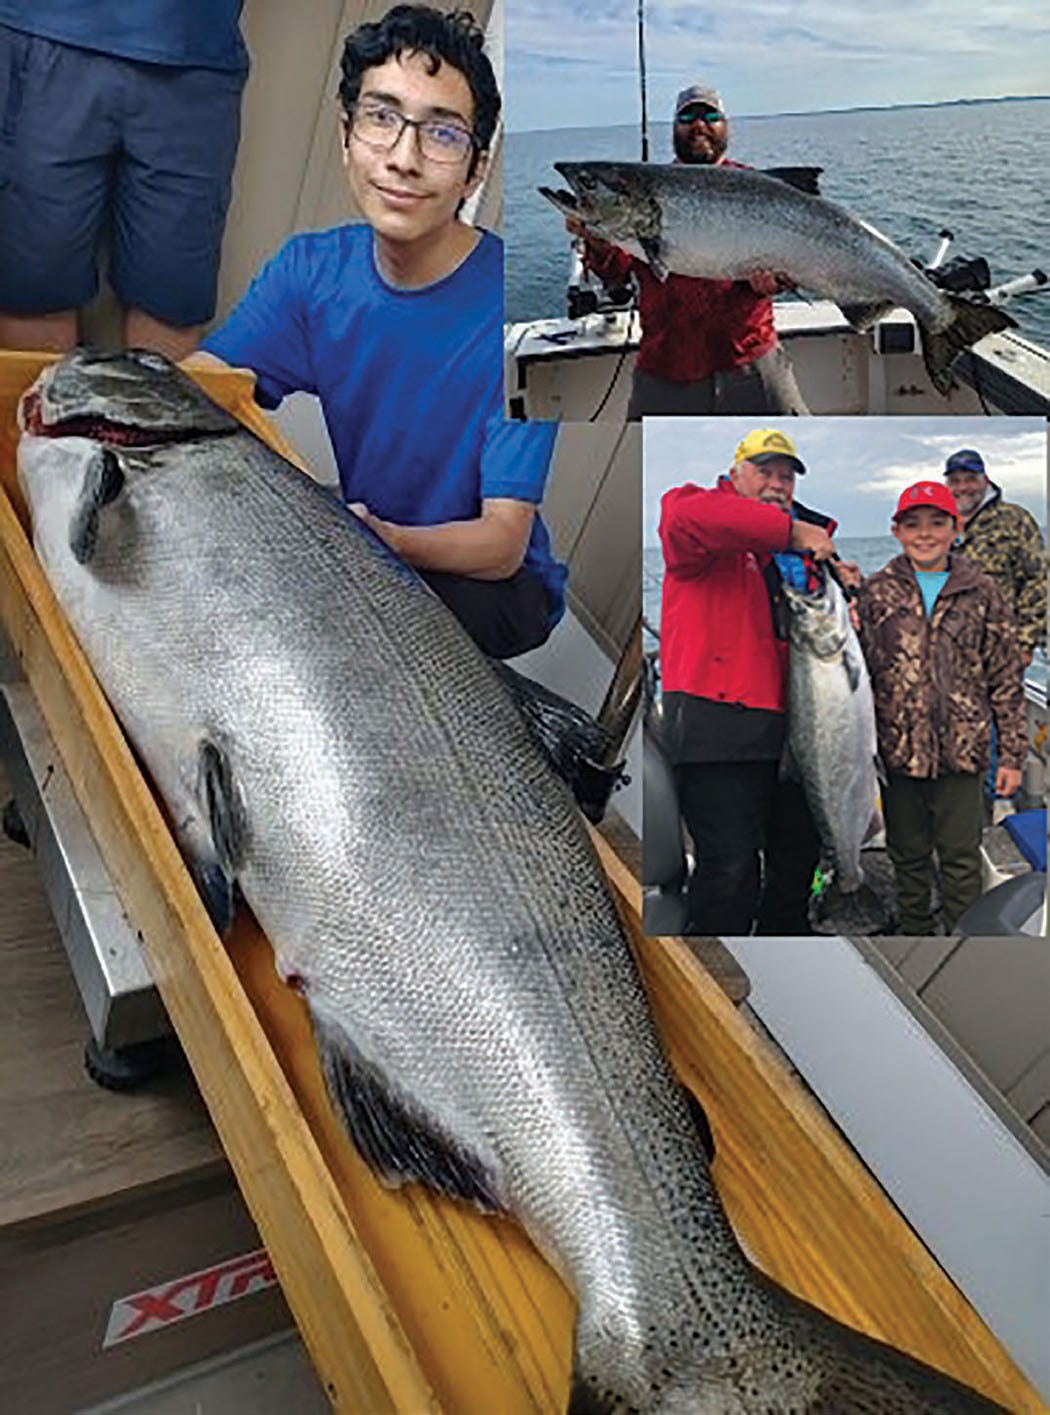 Best Salmon Fishing Tips - Improve Your Total Catch Every Day!